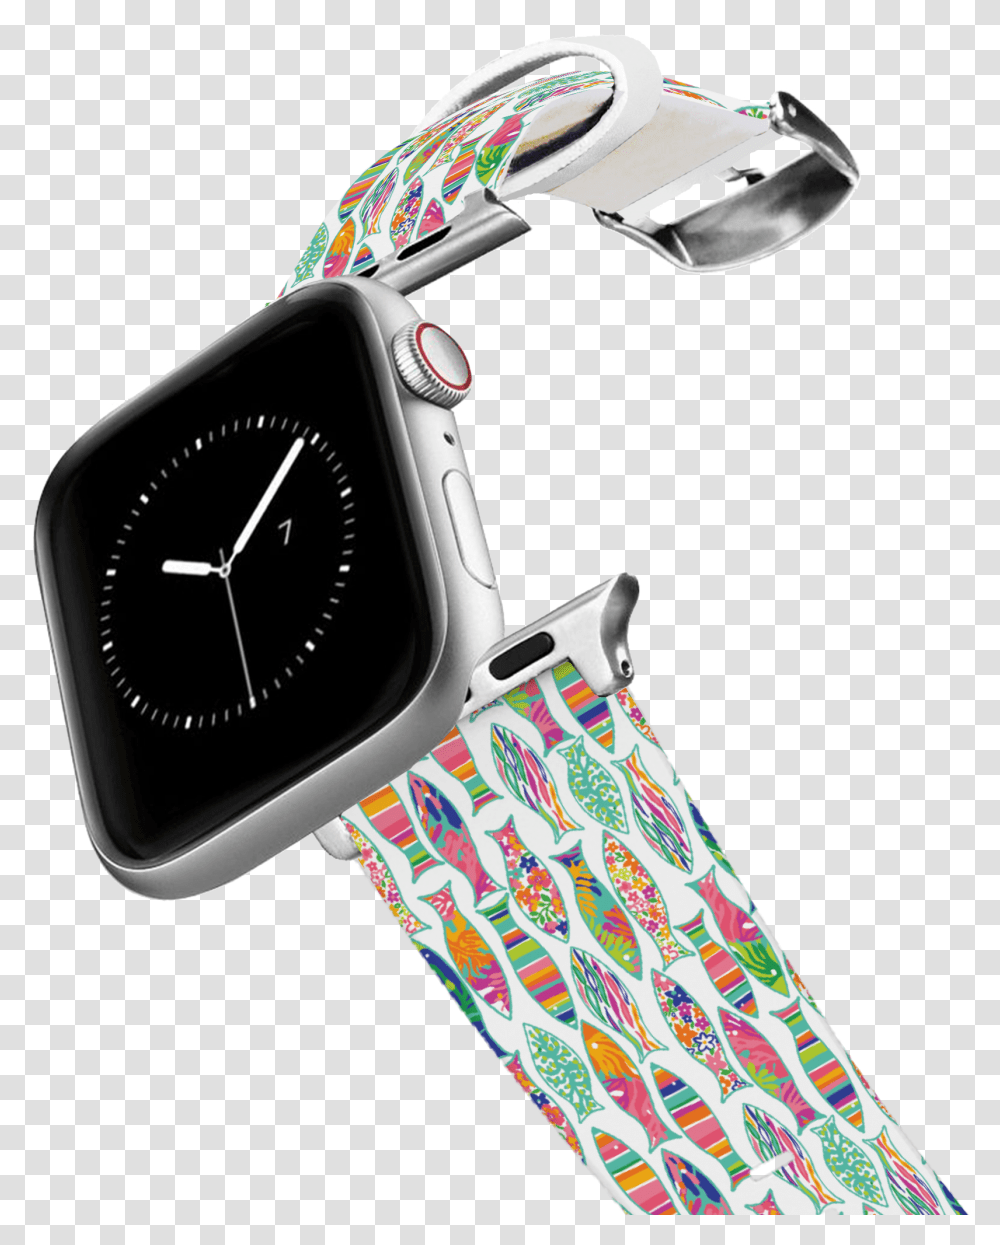 Apple Watch Pug Band, Blow Dryer, Appliance, Hair Drier, Analog Clock Transparent Png